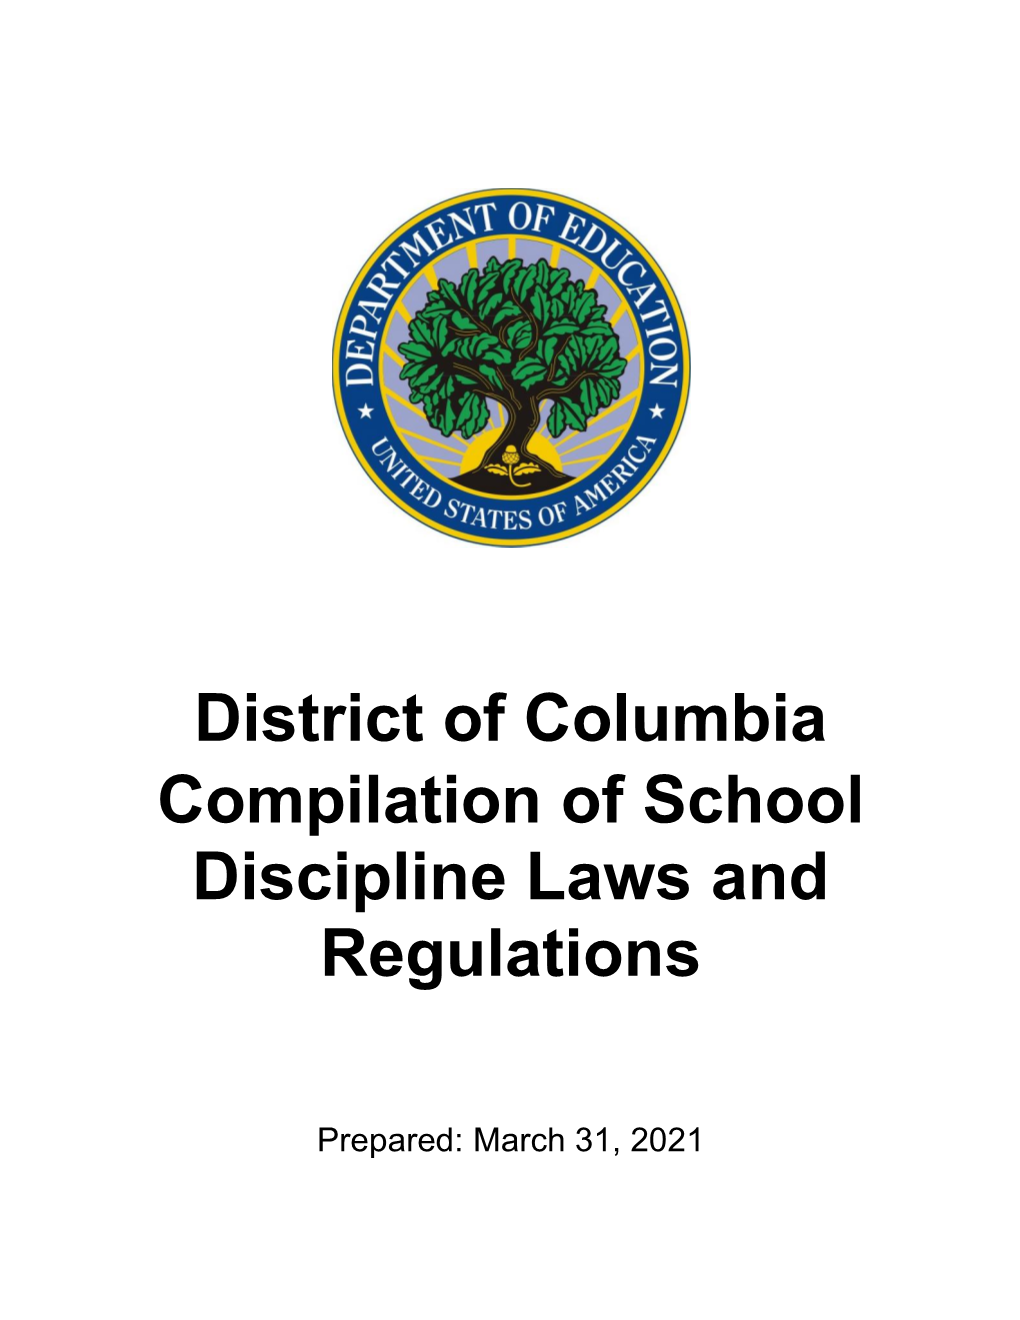 District of Columbia Compilation of School Discipline Laws and Regulations